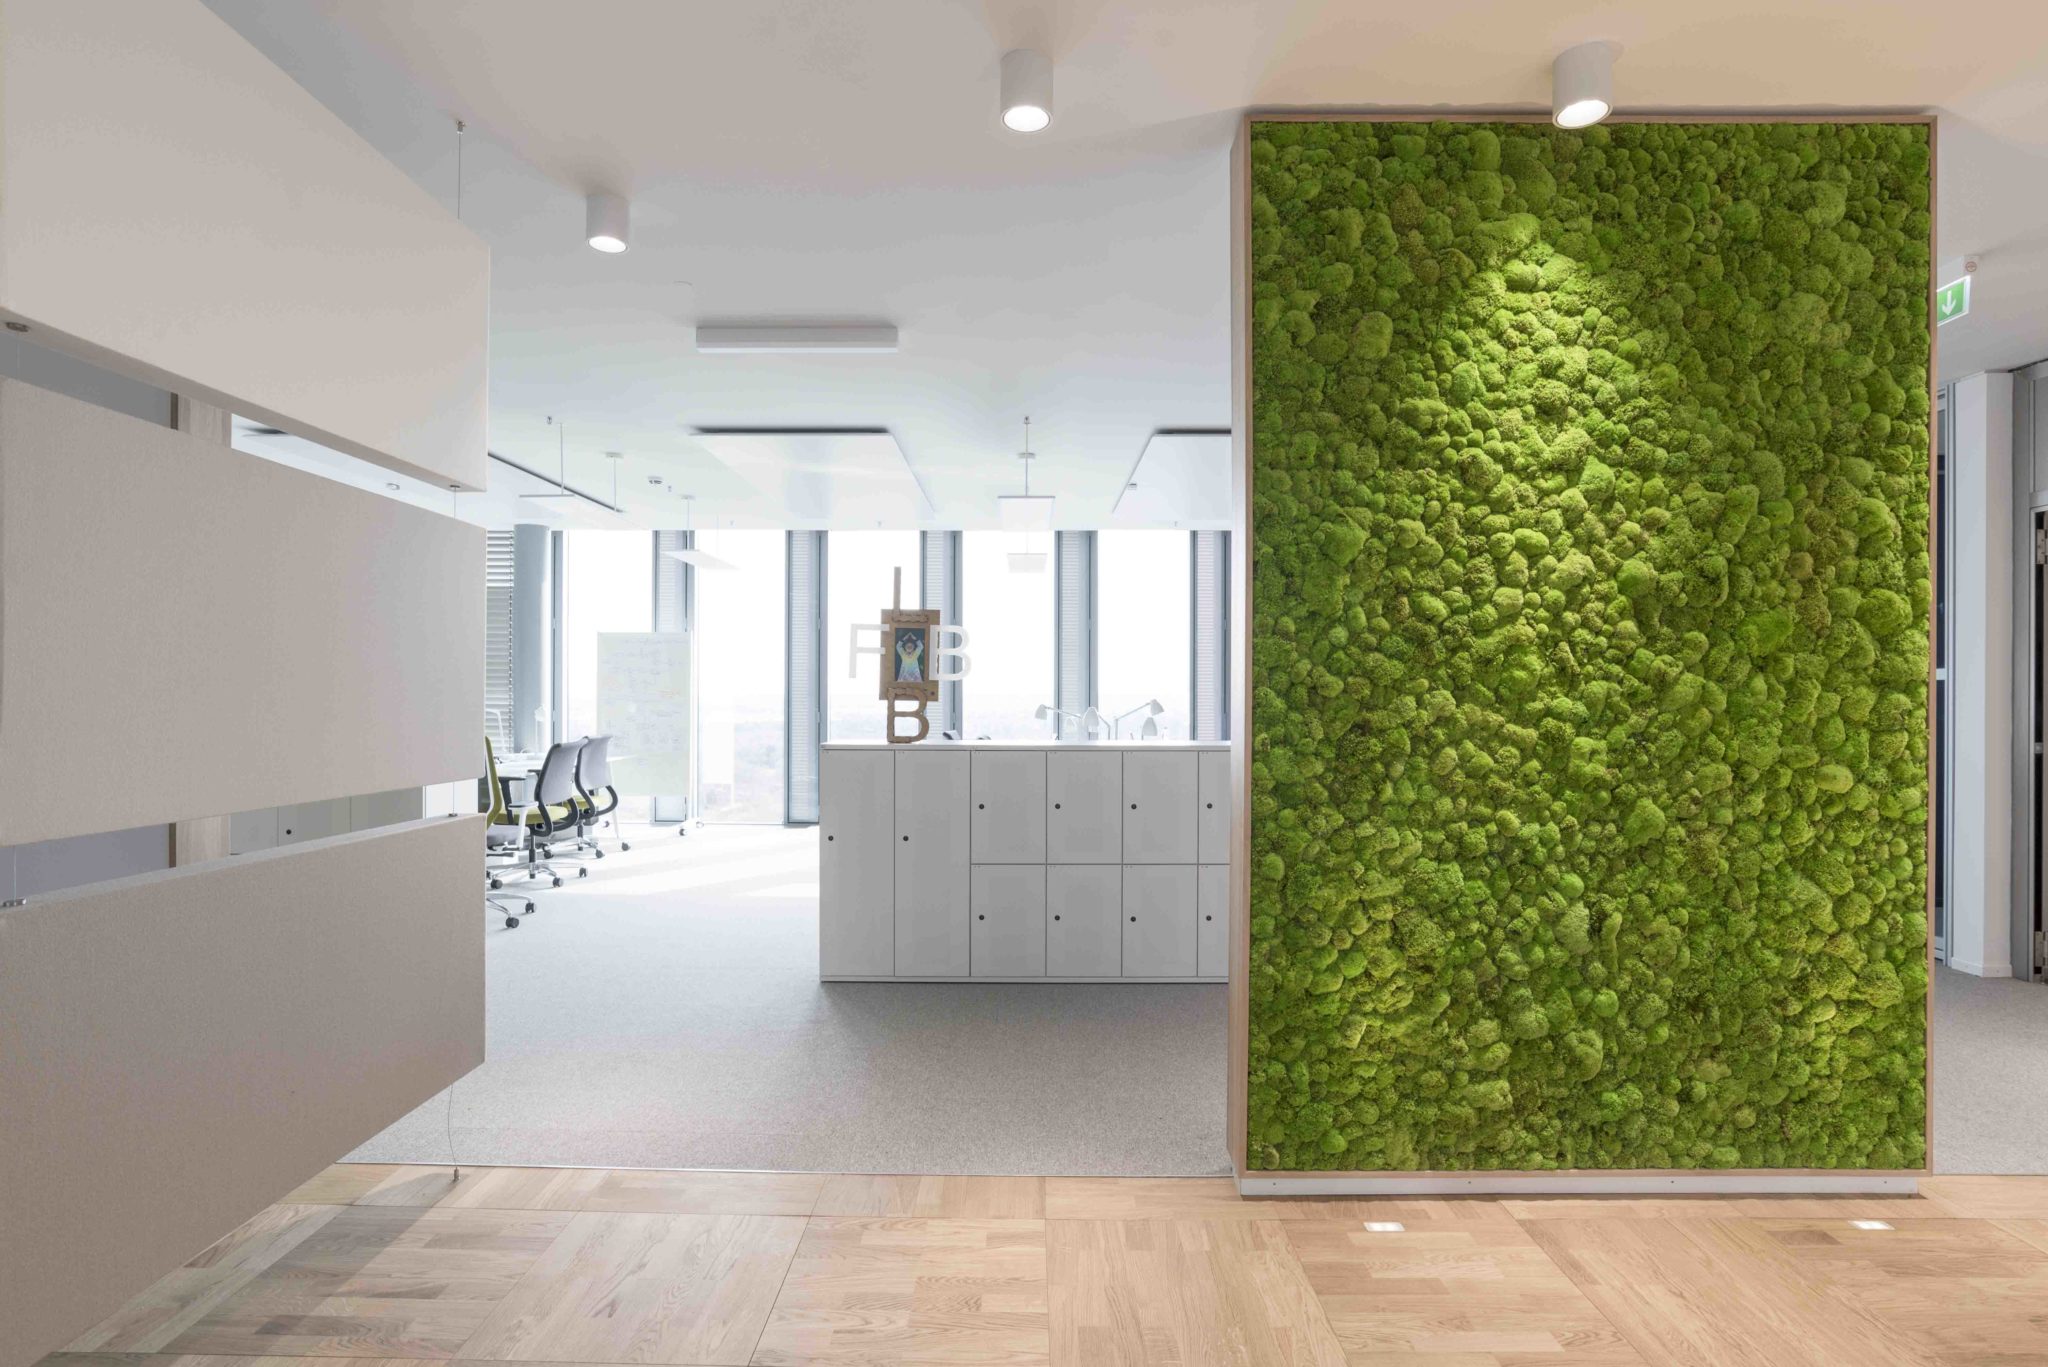 Plant and Moss Walls - Vibe Architecture